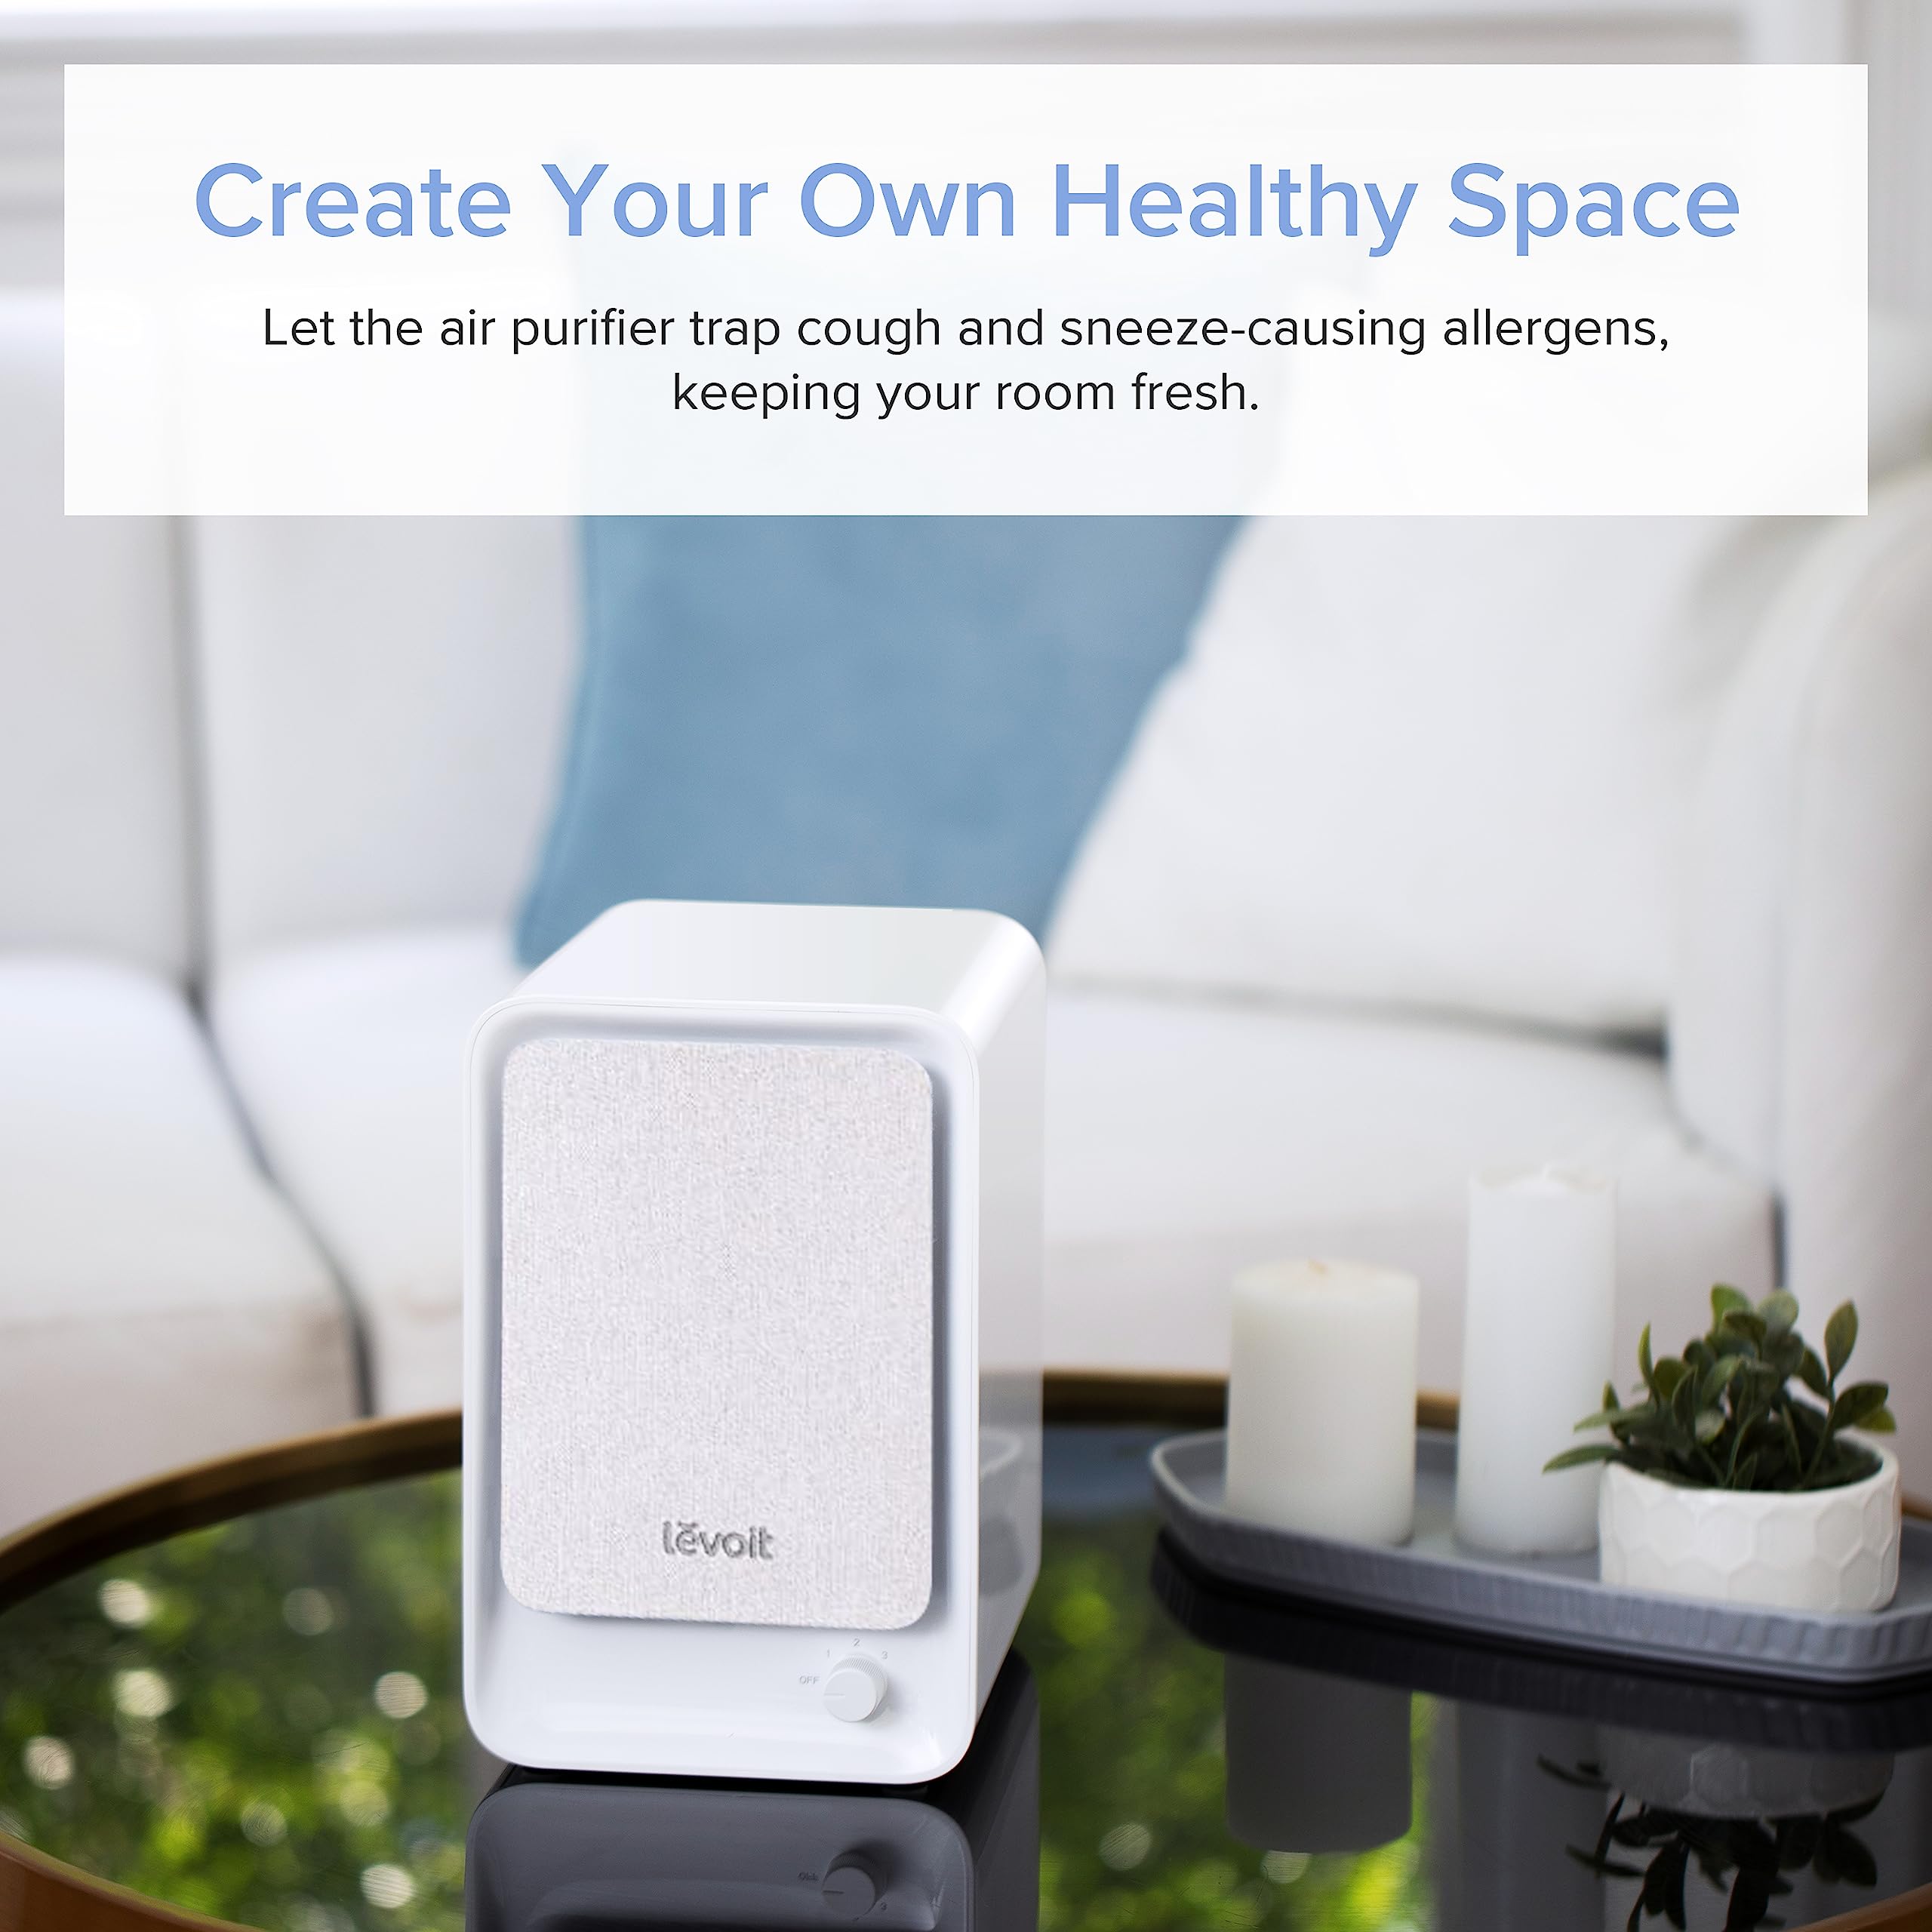 LEVOIT Air Purifiers for Bedroom Home, HEPA Freshener Filter Small Room for Smoke, Allergies, Pet Dander, Pollen, Odor, Dust Remover, Ozone Free, Quiet, Desktop, Office, Table Top, LV-H126, Beige